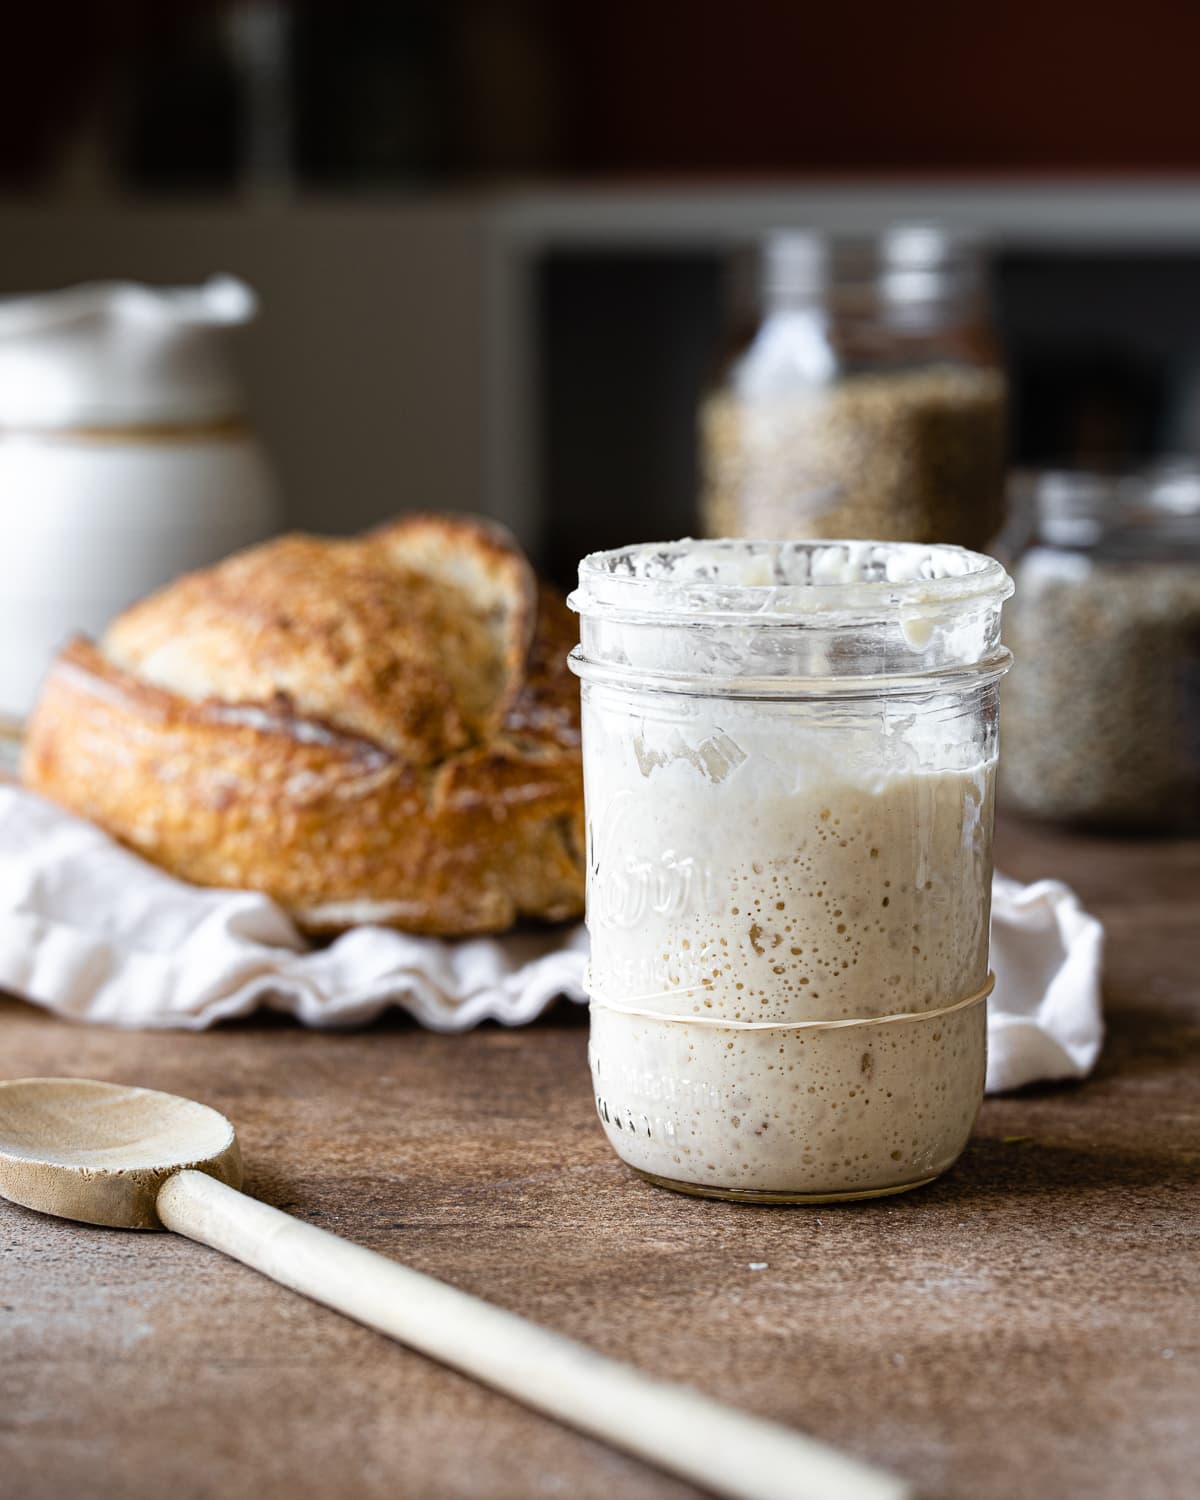 a jar of bubbly sourdough starter with a loaf of bread in the background